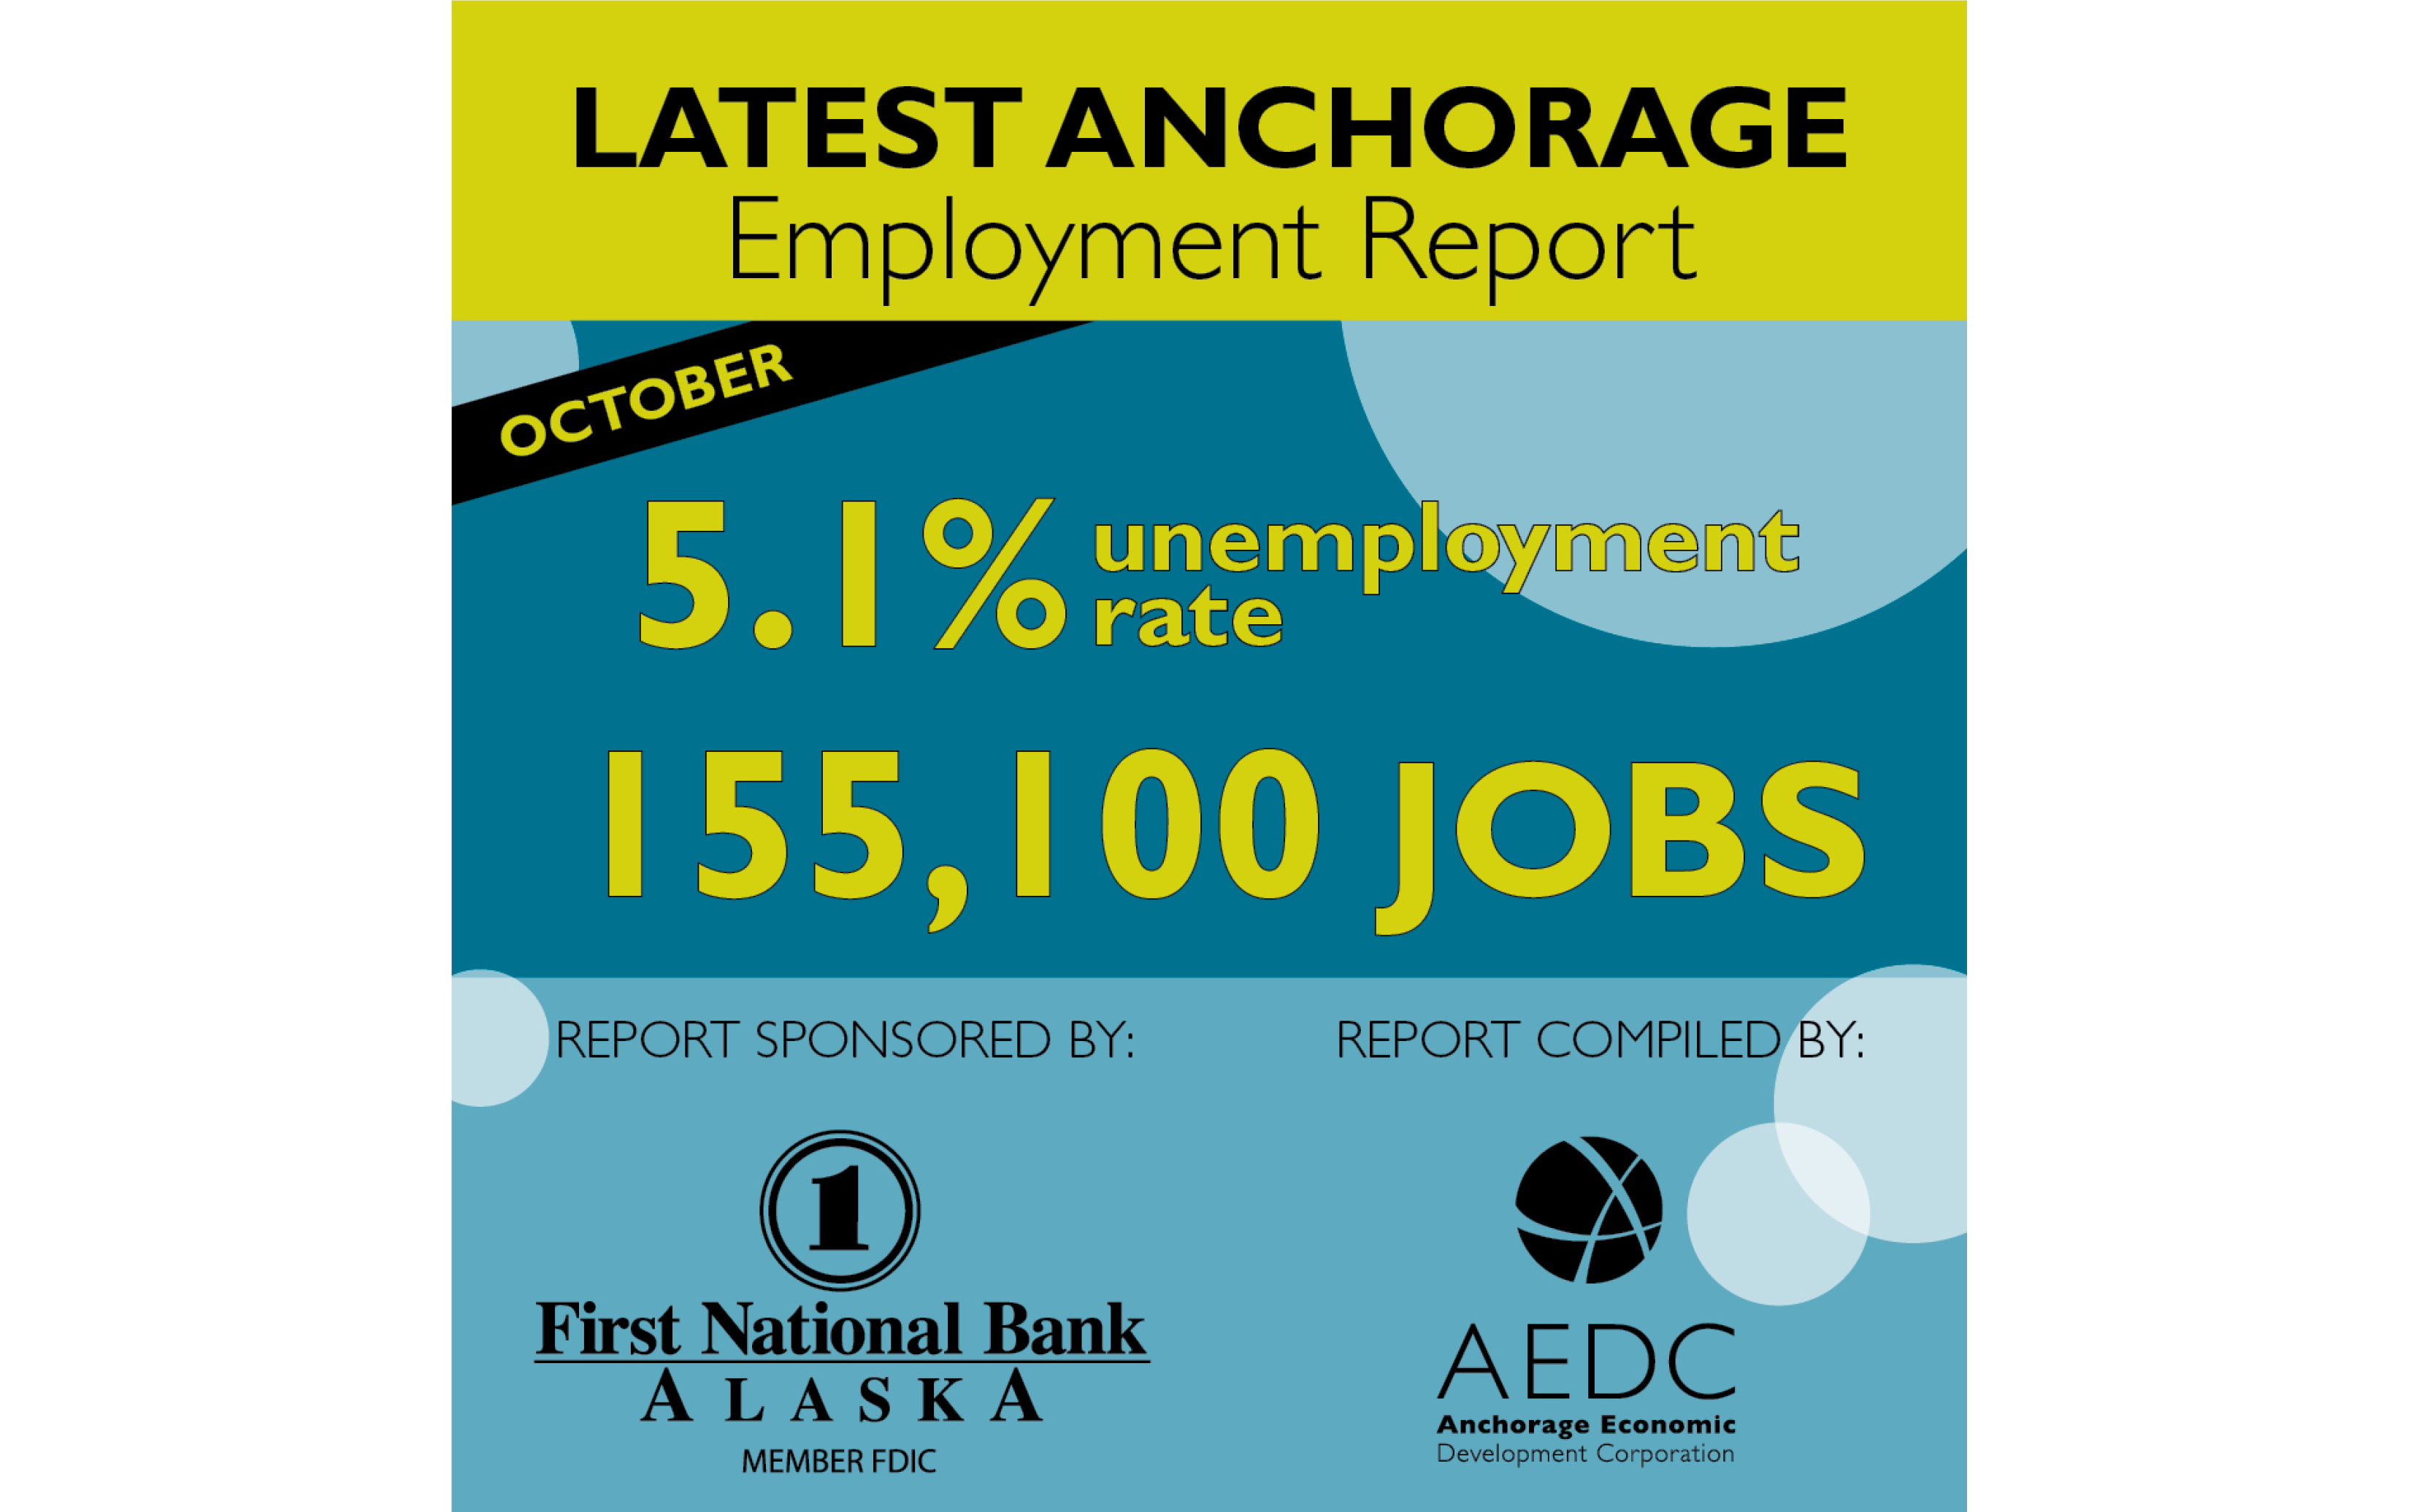 Anchorage Employment Report: Eighth Edition 2016 - AEDC